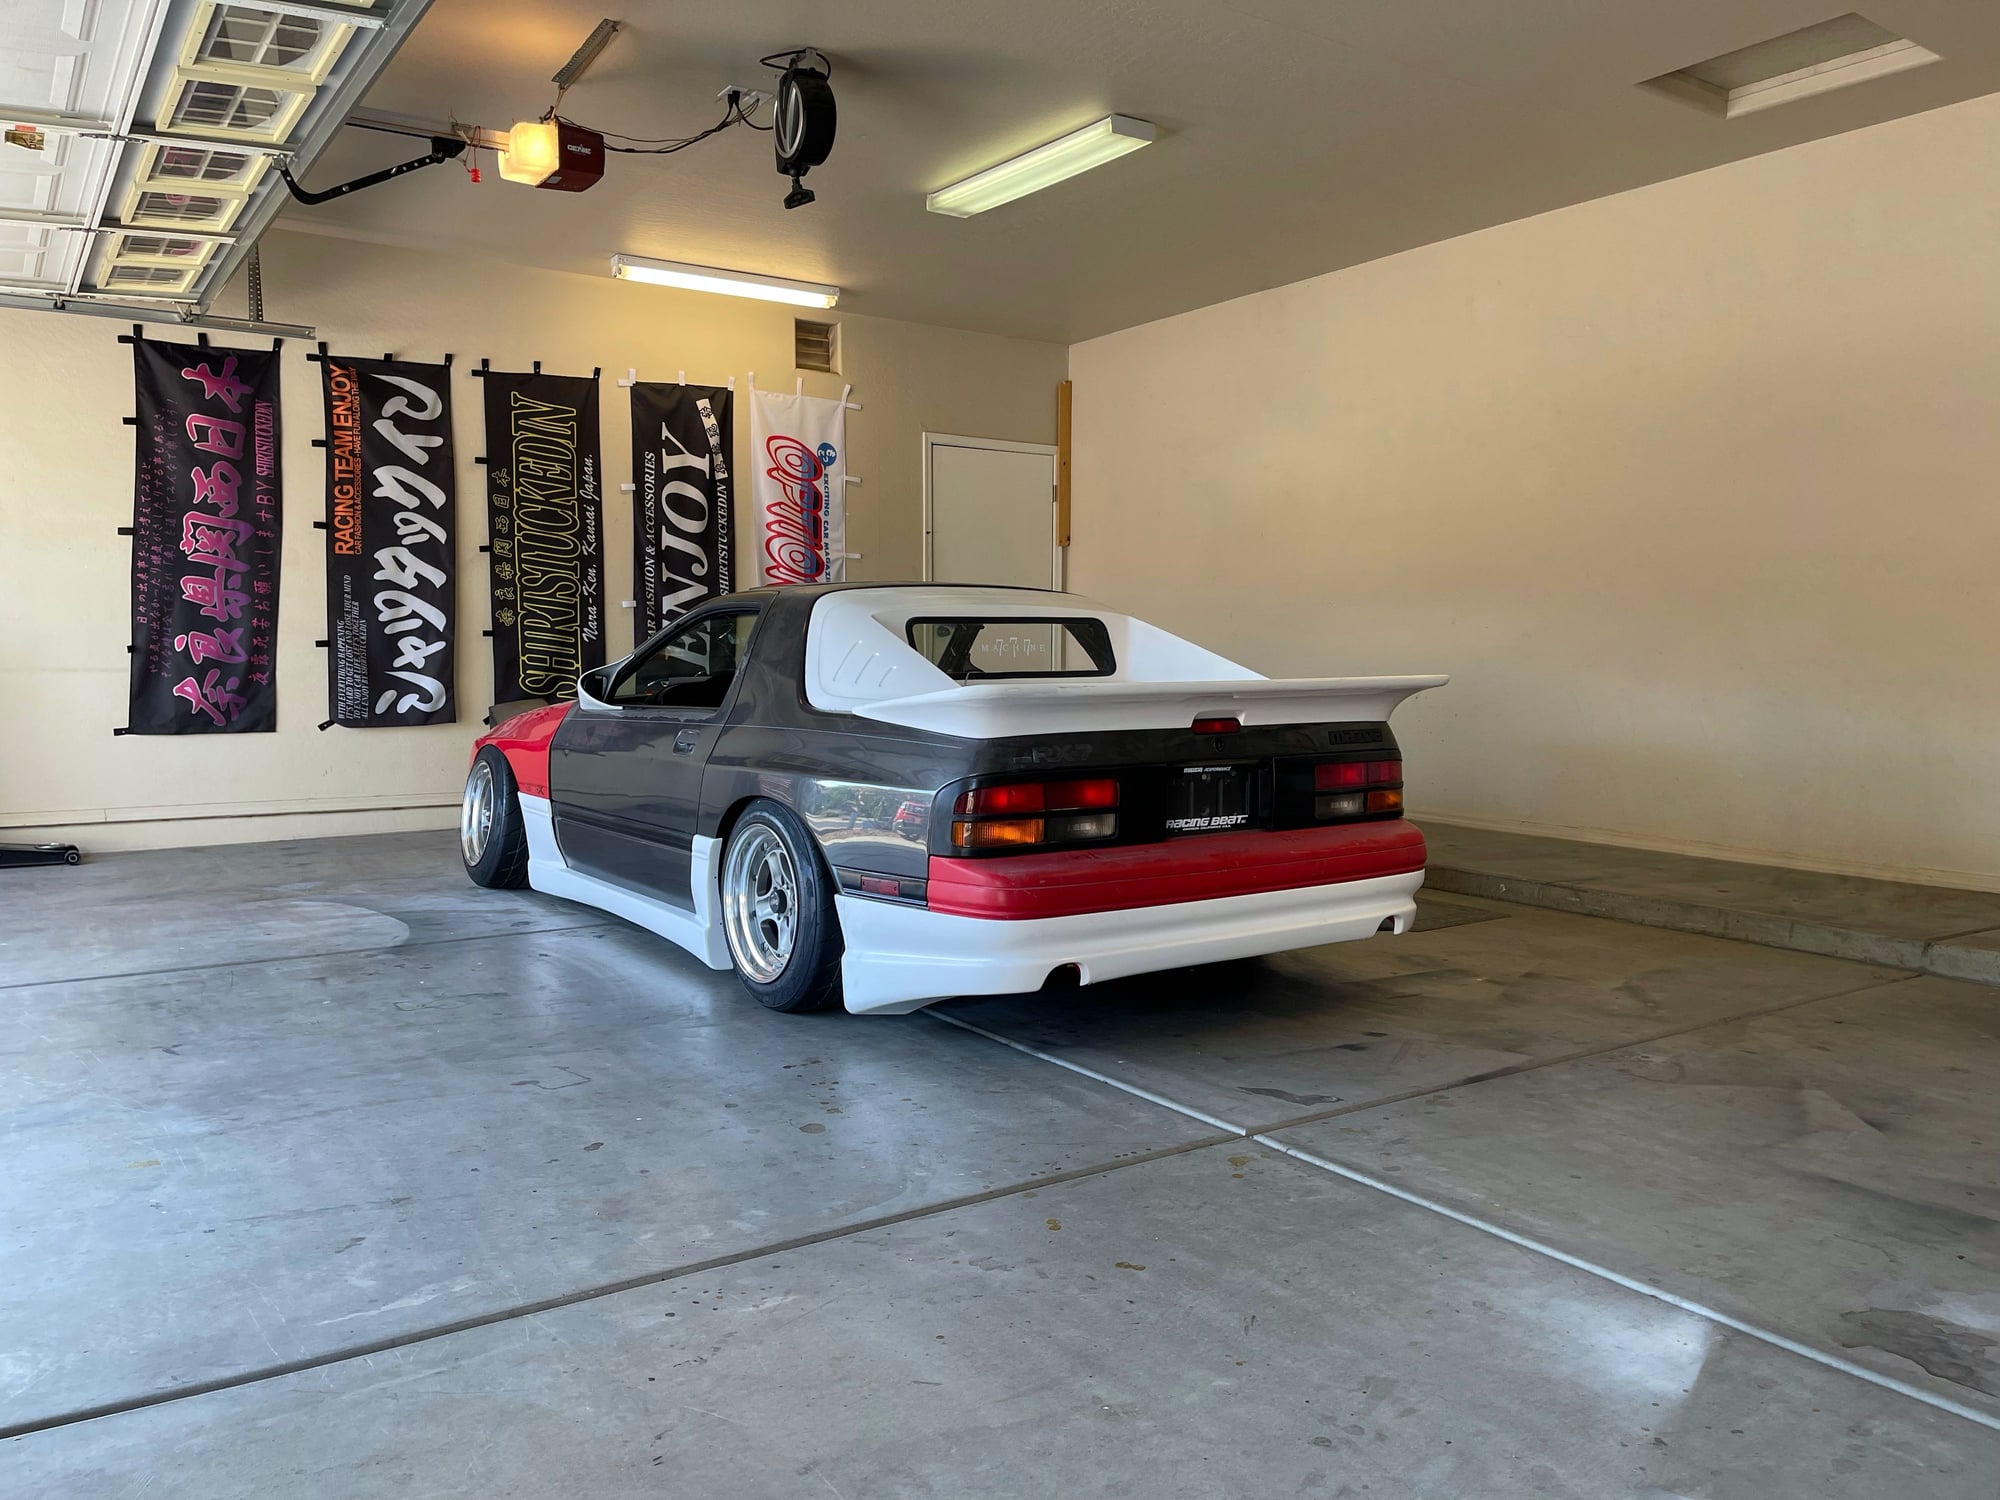 1987 Mazda RX-7 - 1987 Mazda RX7 - Used - VIN JM1FC3318HO510681 - 70,000 Miles - Other - 2WD - Coupe - Gray - Gilbert, AZ 85295, United States